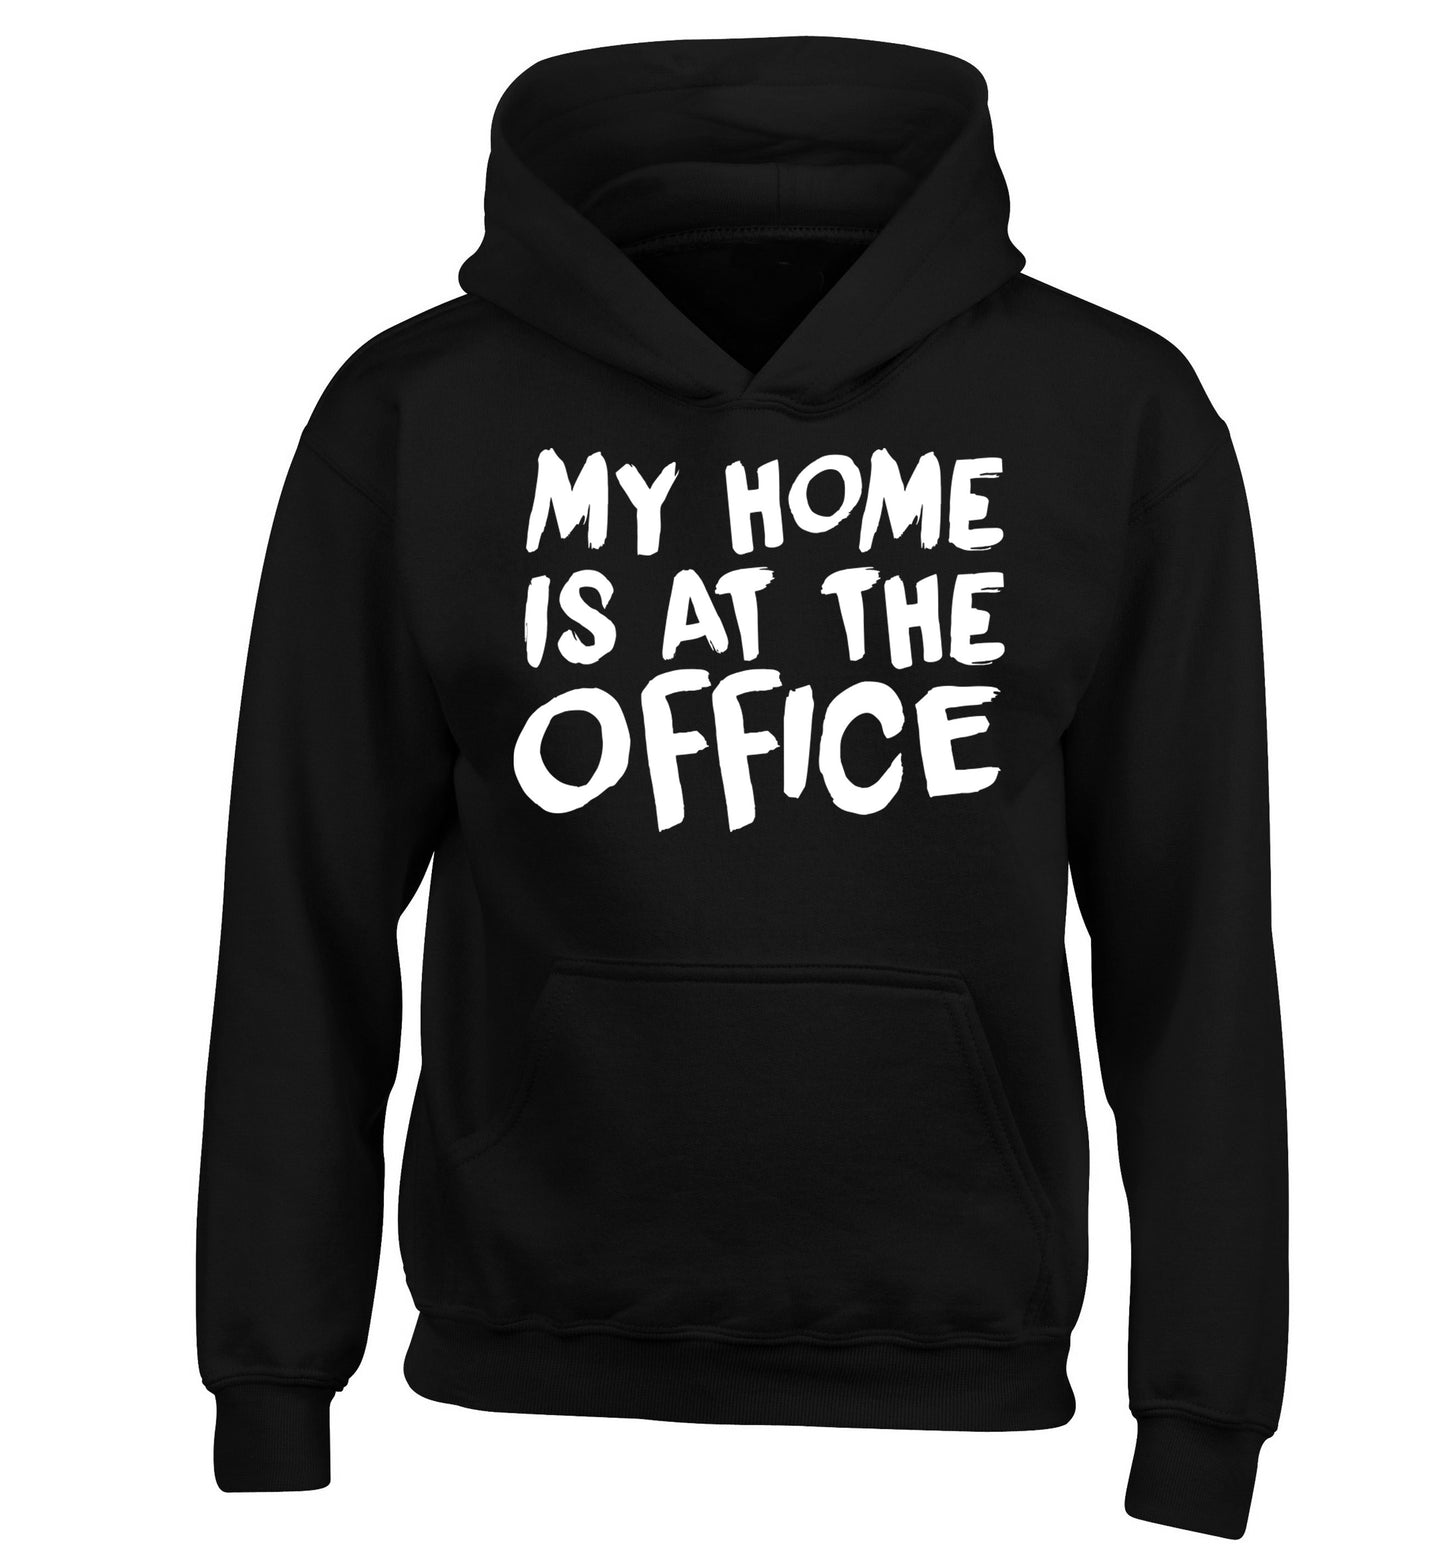 My home is at the office children's black hoodie 12-14 Years